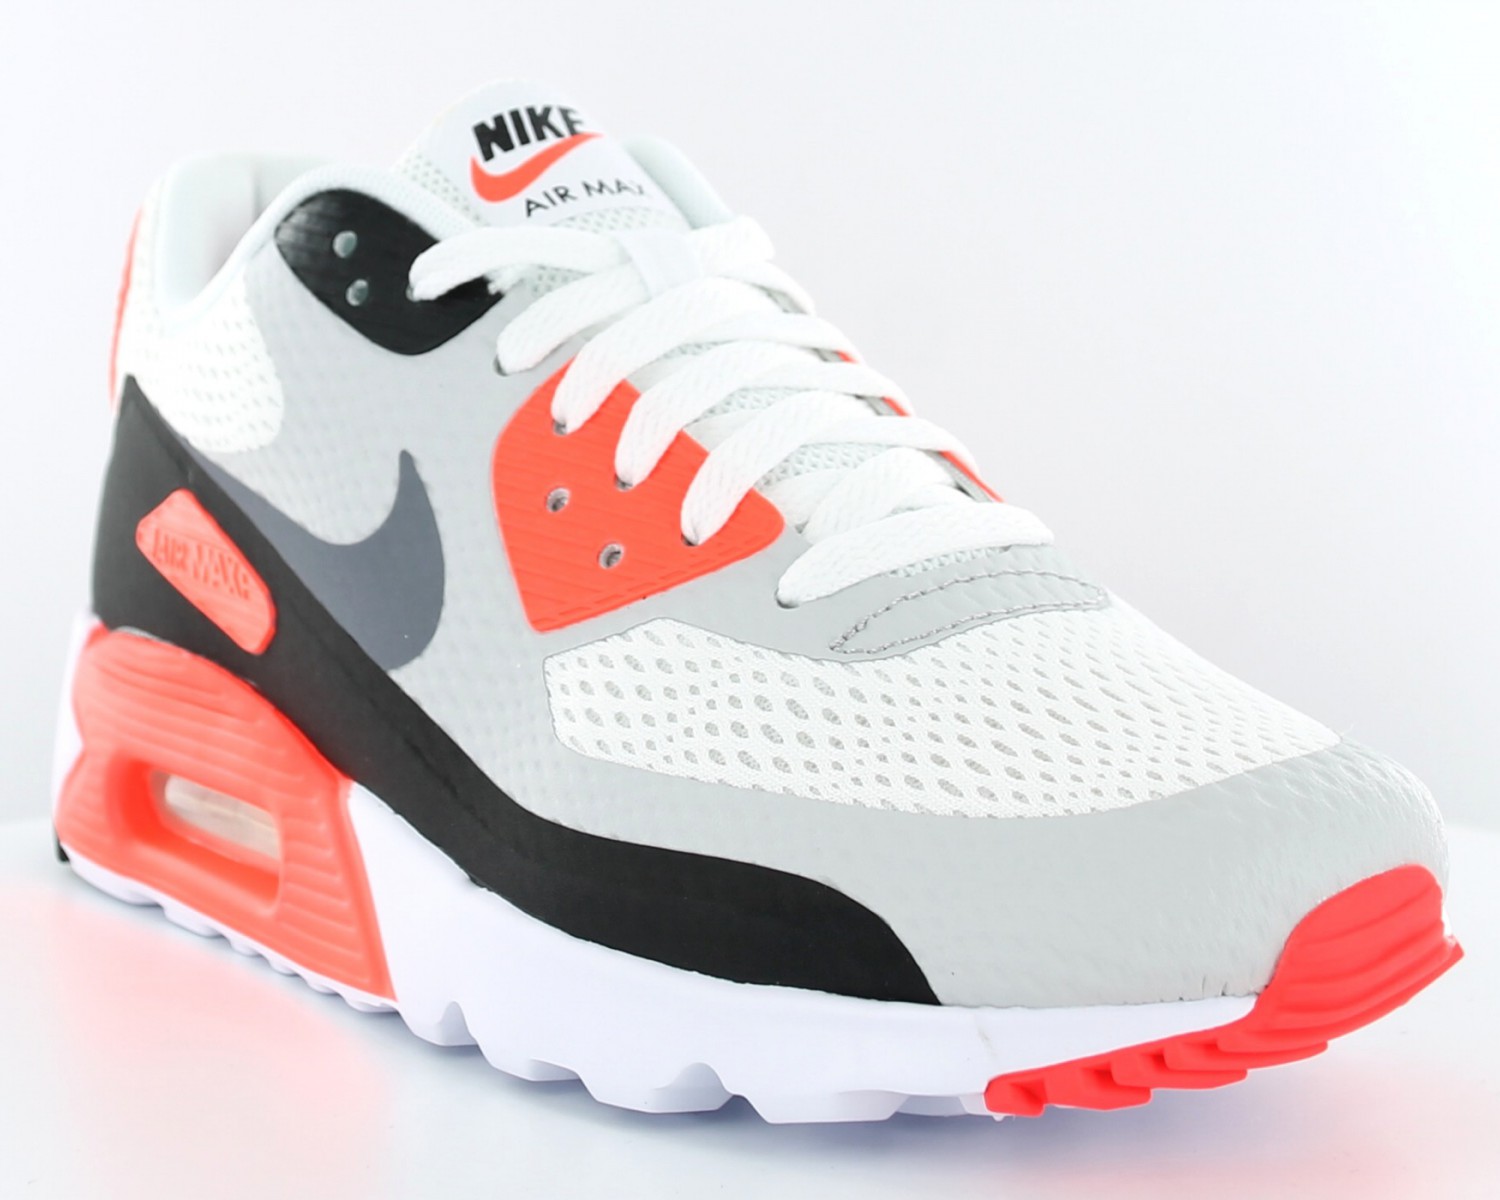 Nike air max 90 ultra essential infra red BLANC/NOIR/INFRARED ...